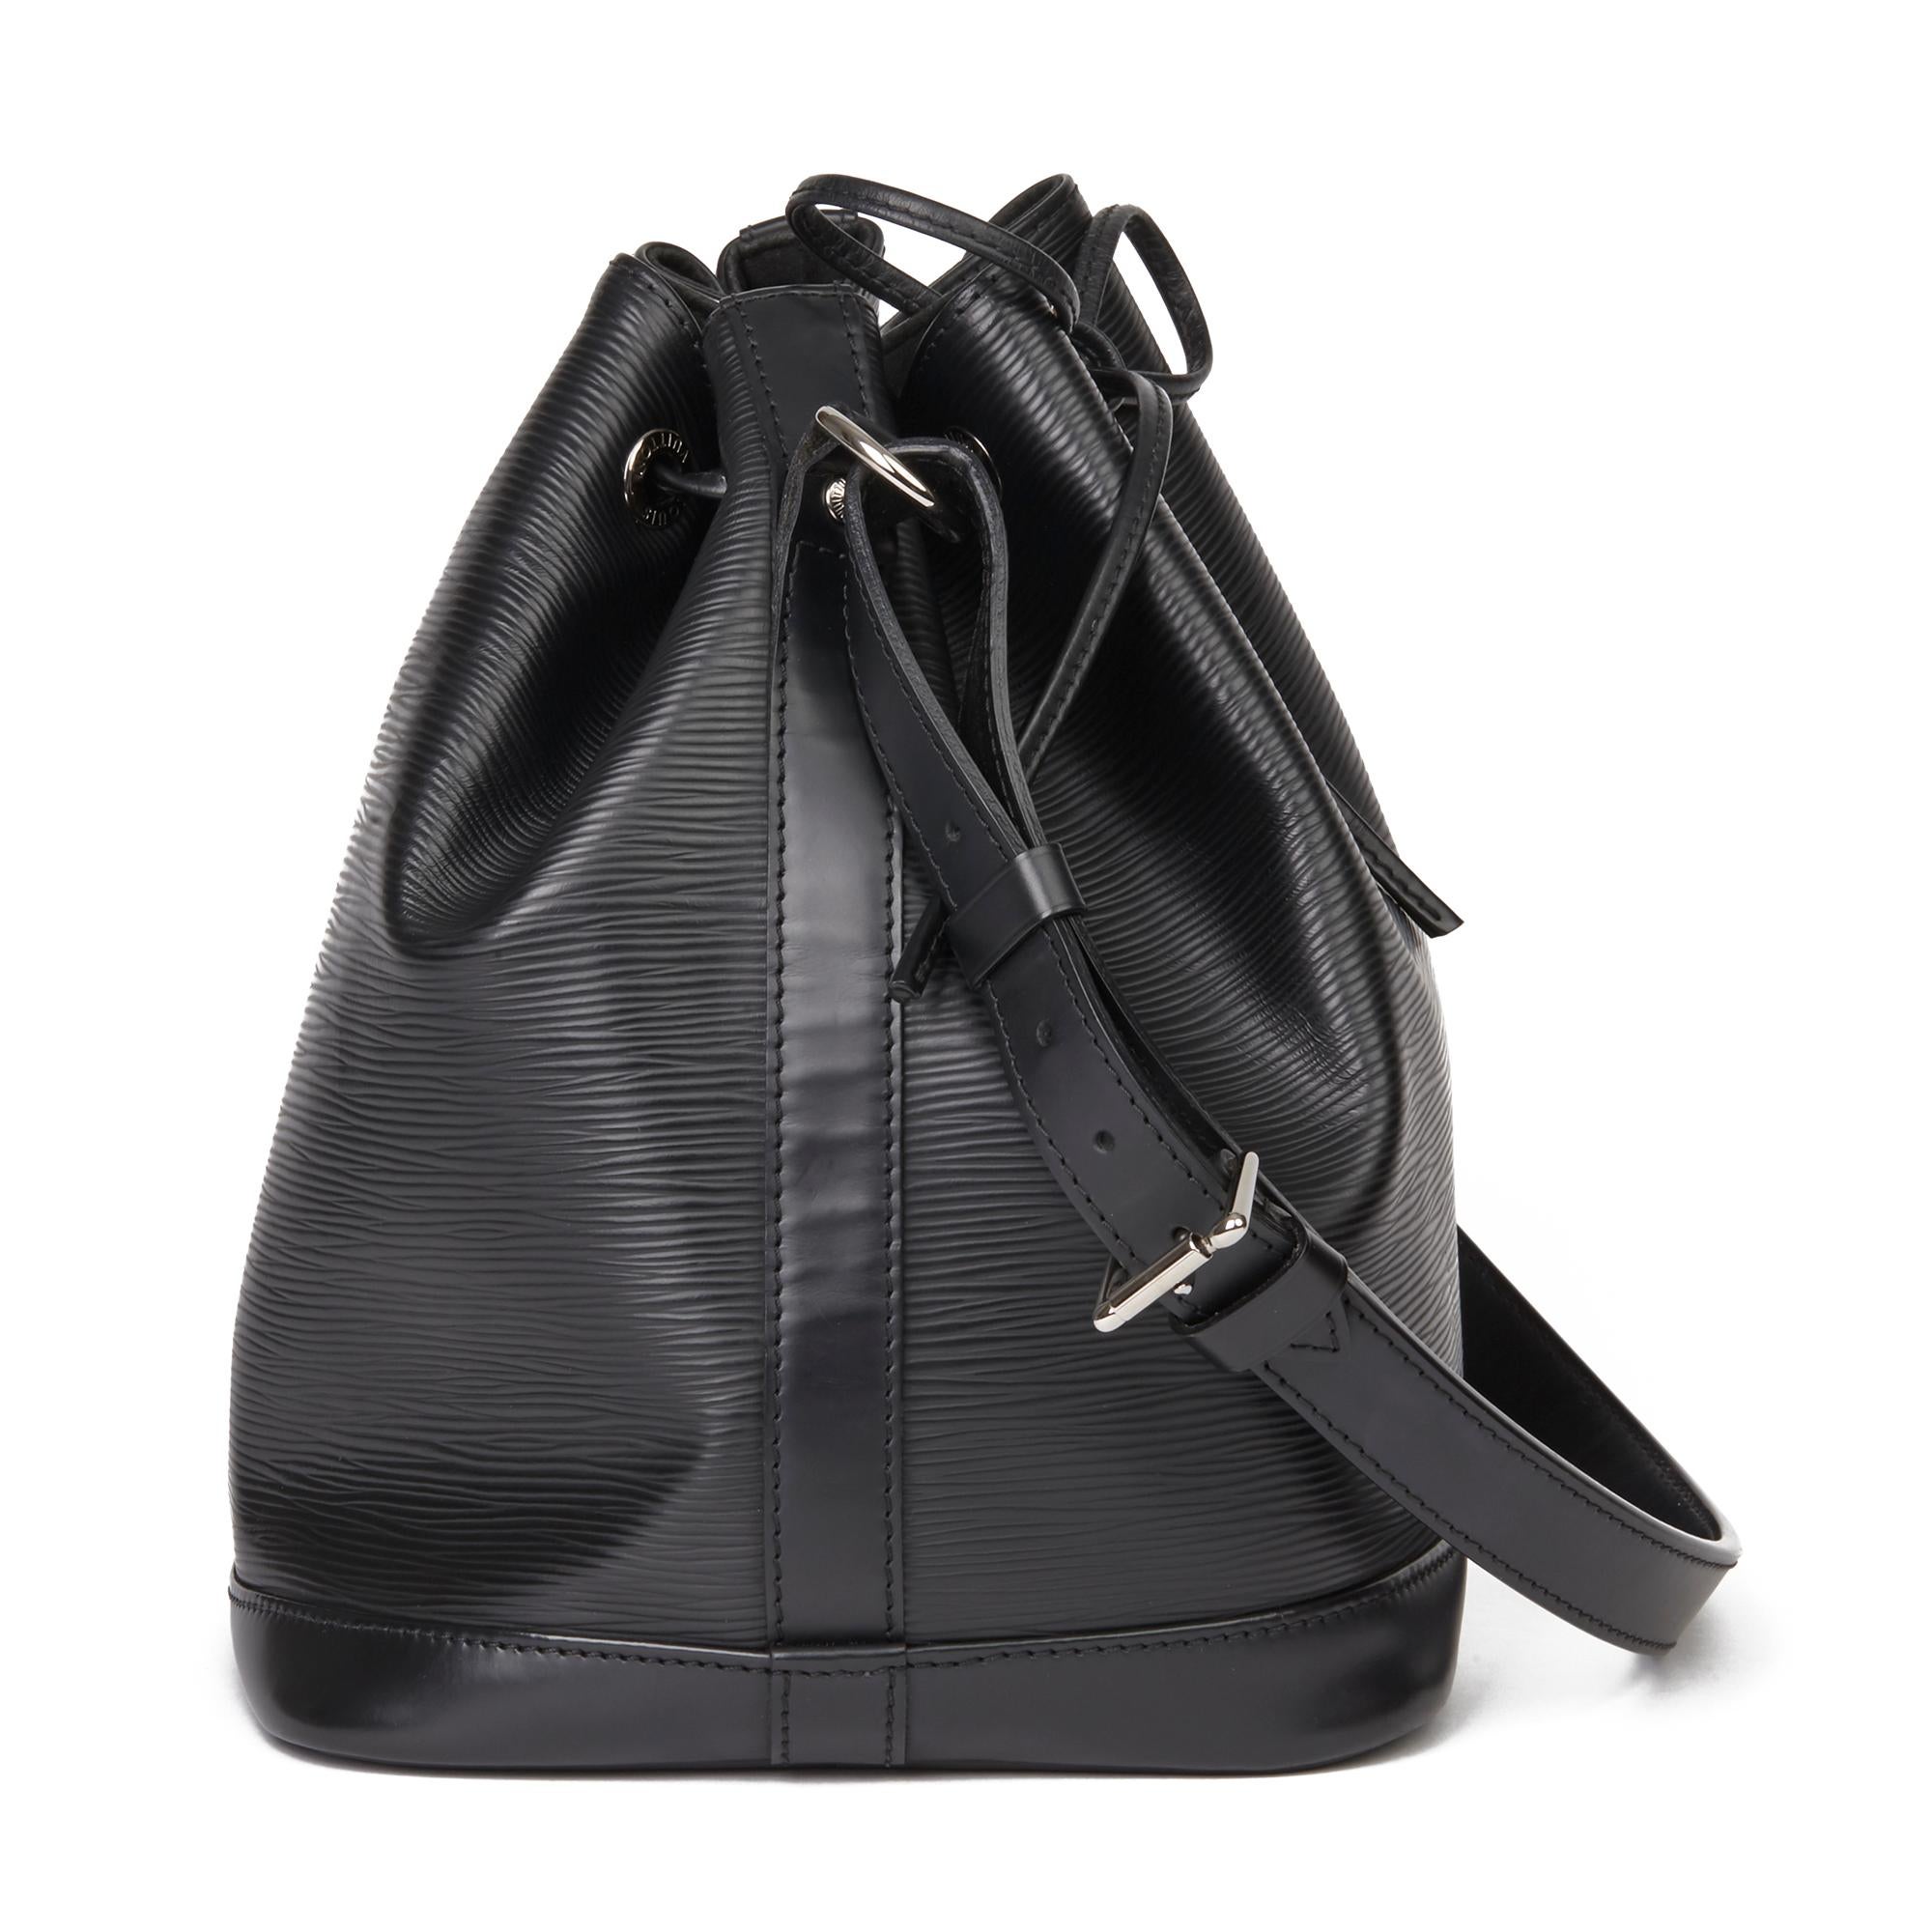 LOUIS VUITTON
Black Epi Leather Petit Noé

Xupes Reference: HB3284
Serial Number: TJ2143 
Age (Circa): 2013
Accompanied By: Louis Vuitton Dust Bag 
Authenticity Details: Date Stamp (Made in France) 
Gender: Ladies
Type: Shoulder

Colour: Black